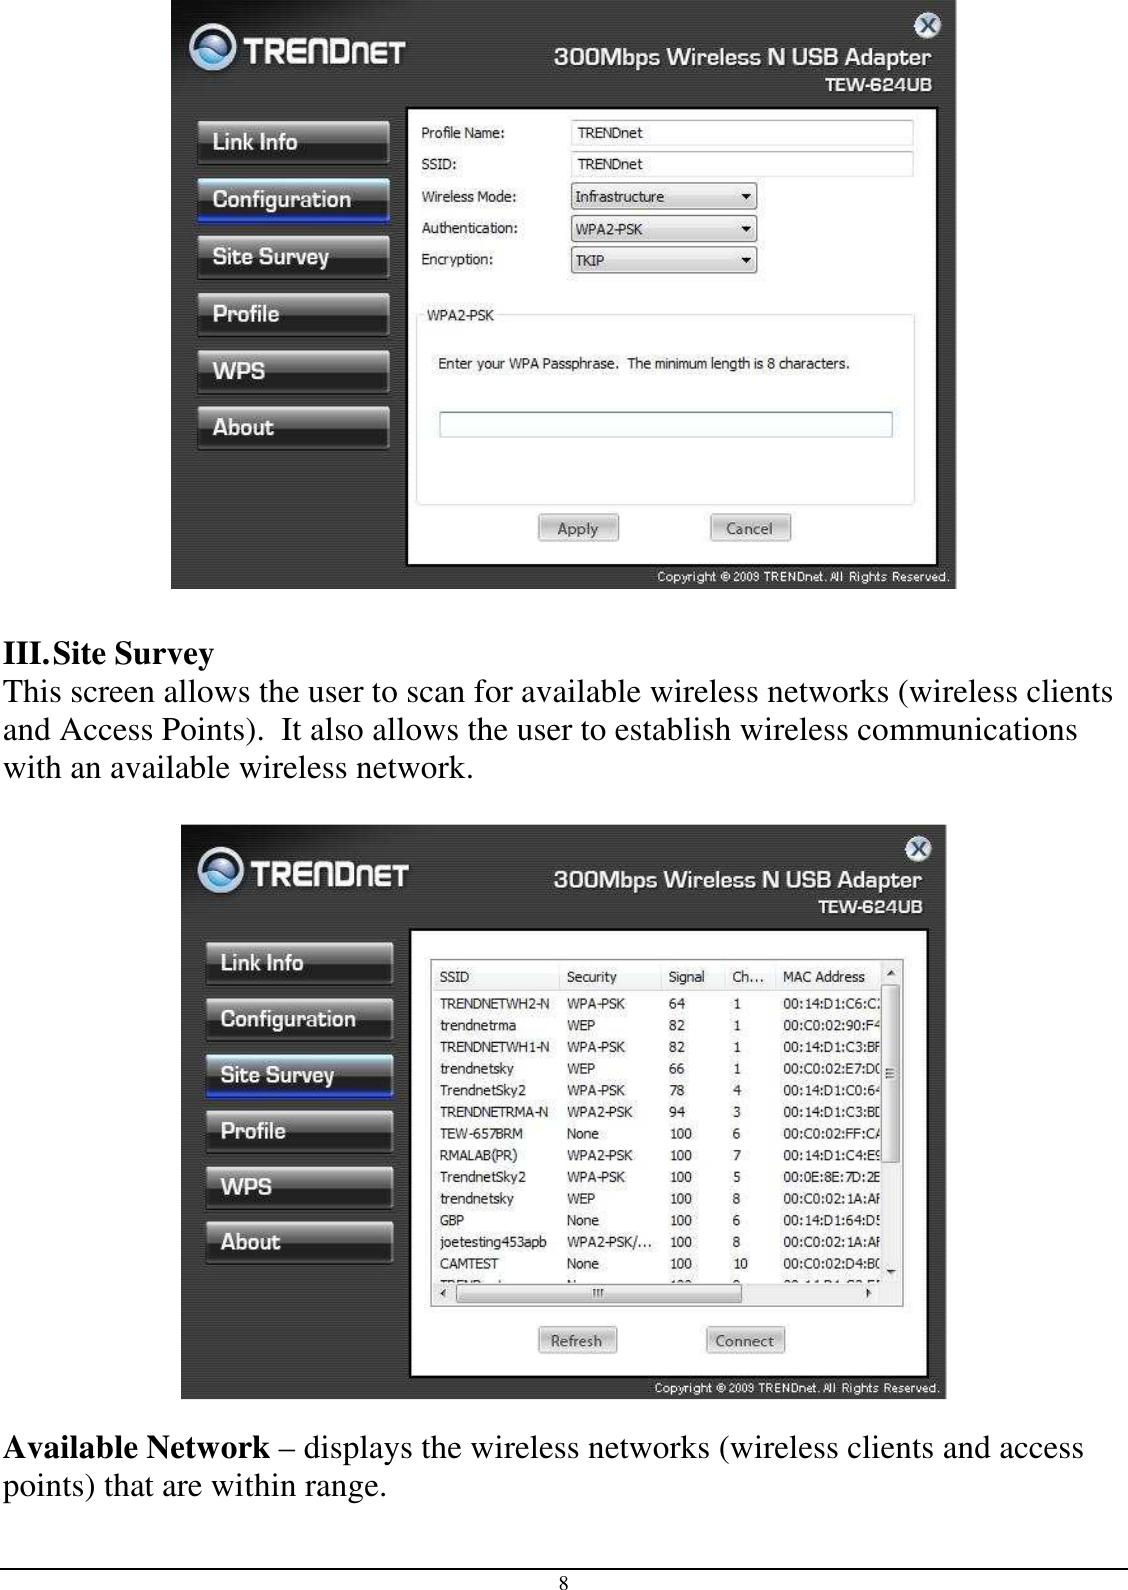 8   III. Site Survey This screen allows the user to scan for available wireless networks (wireless clients and Access Points).  It also allows the user to establish wireless communications with an available wireless network.    Available Network – displays the wireless networks (wireless clients and access points) that are within range.  